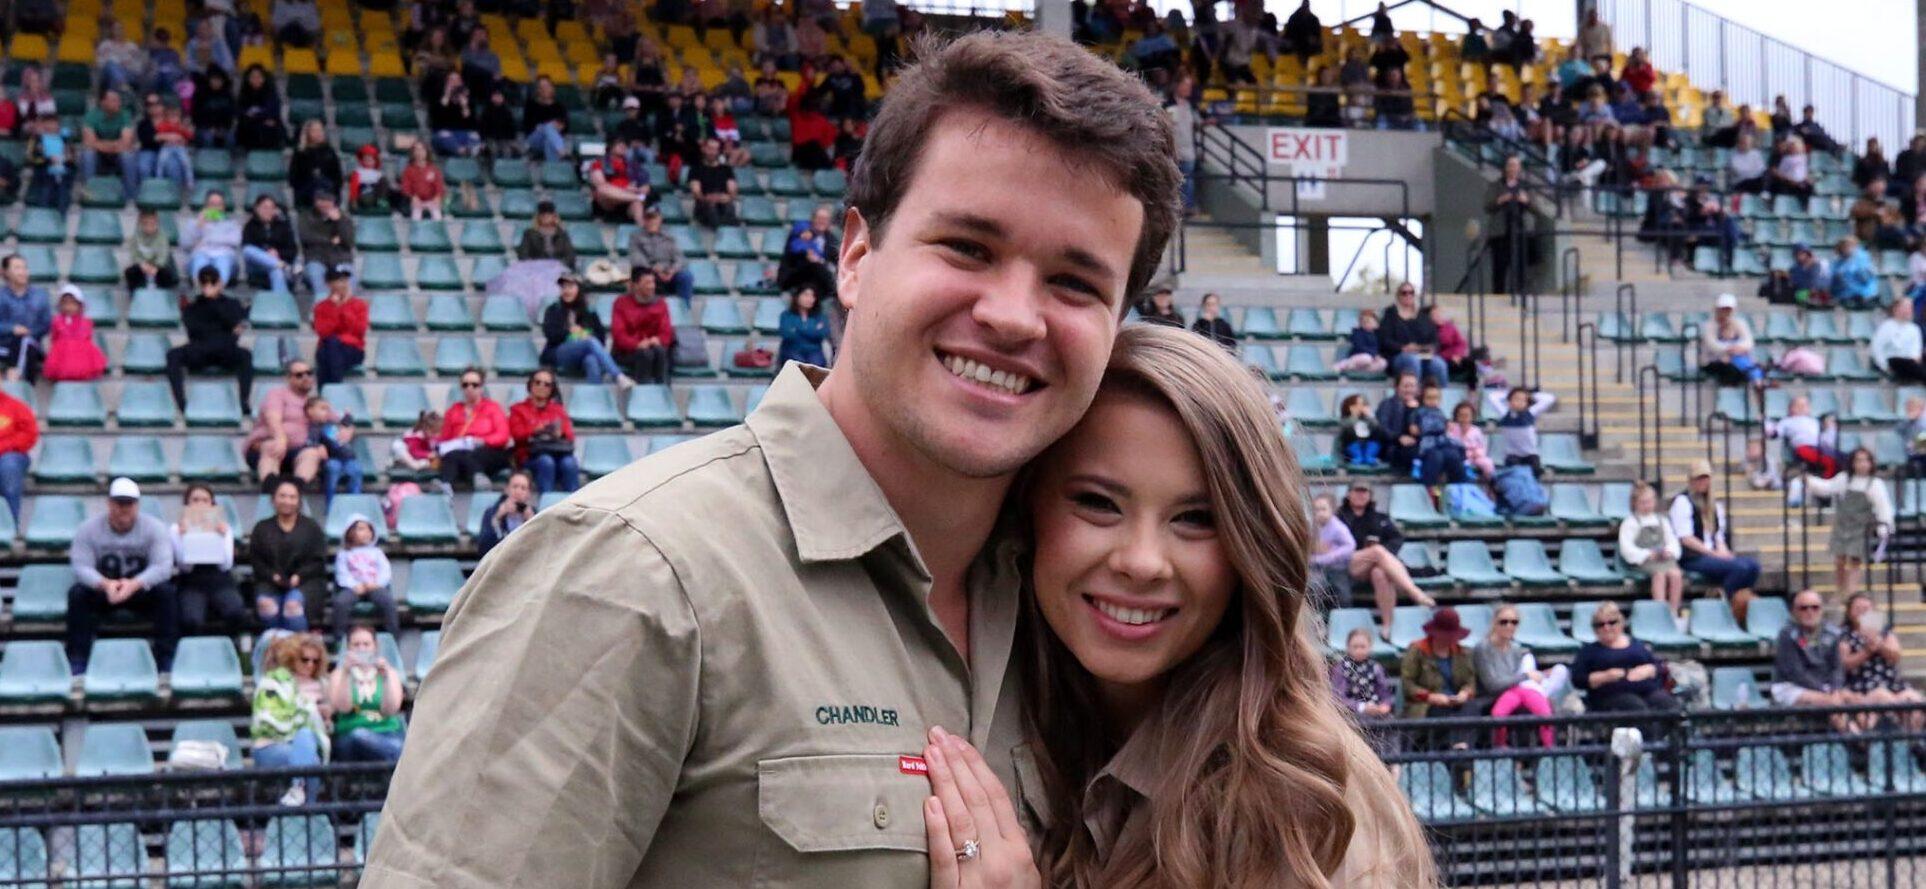 Bindi Irwin celebrates her 22nd birthday, joined by her husband Chandler Powell, brother Robert and mother Terri Irwin at Australia Zoo with A Cake Cutting & Family Crocodile Feeding in the 